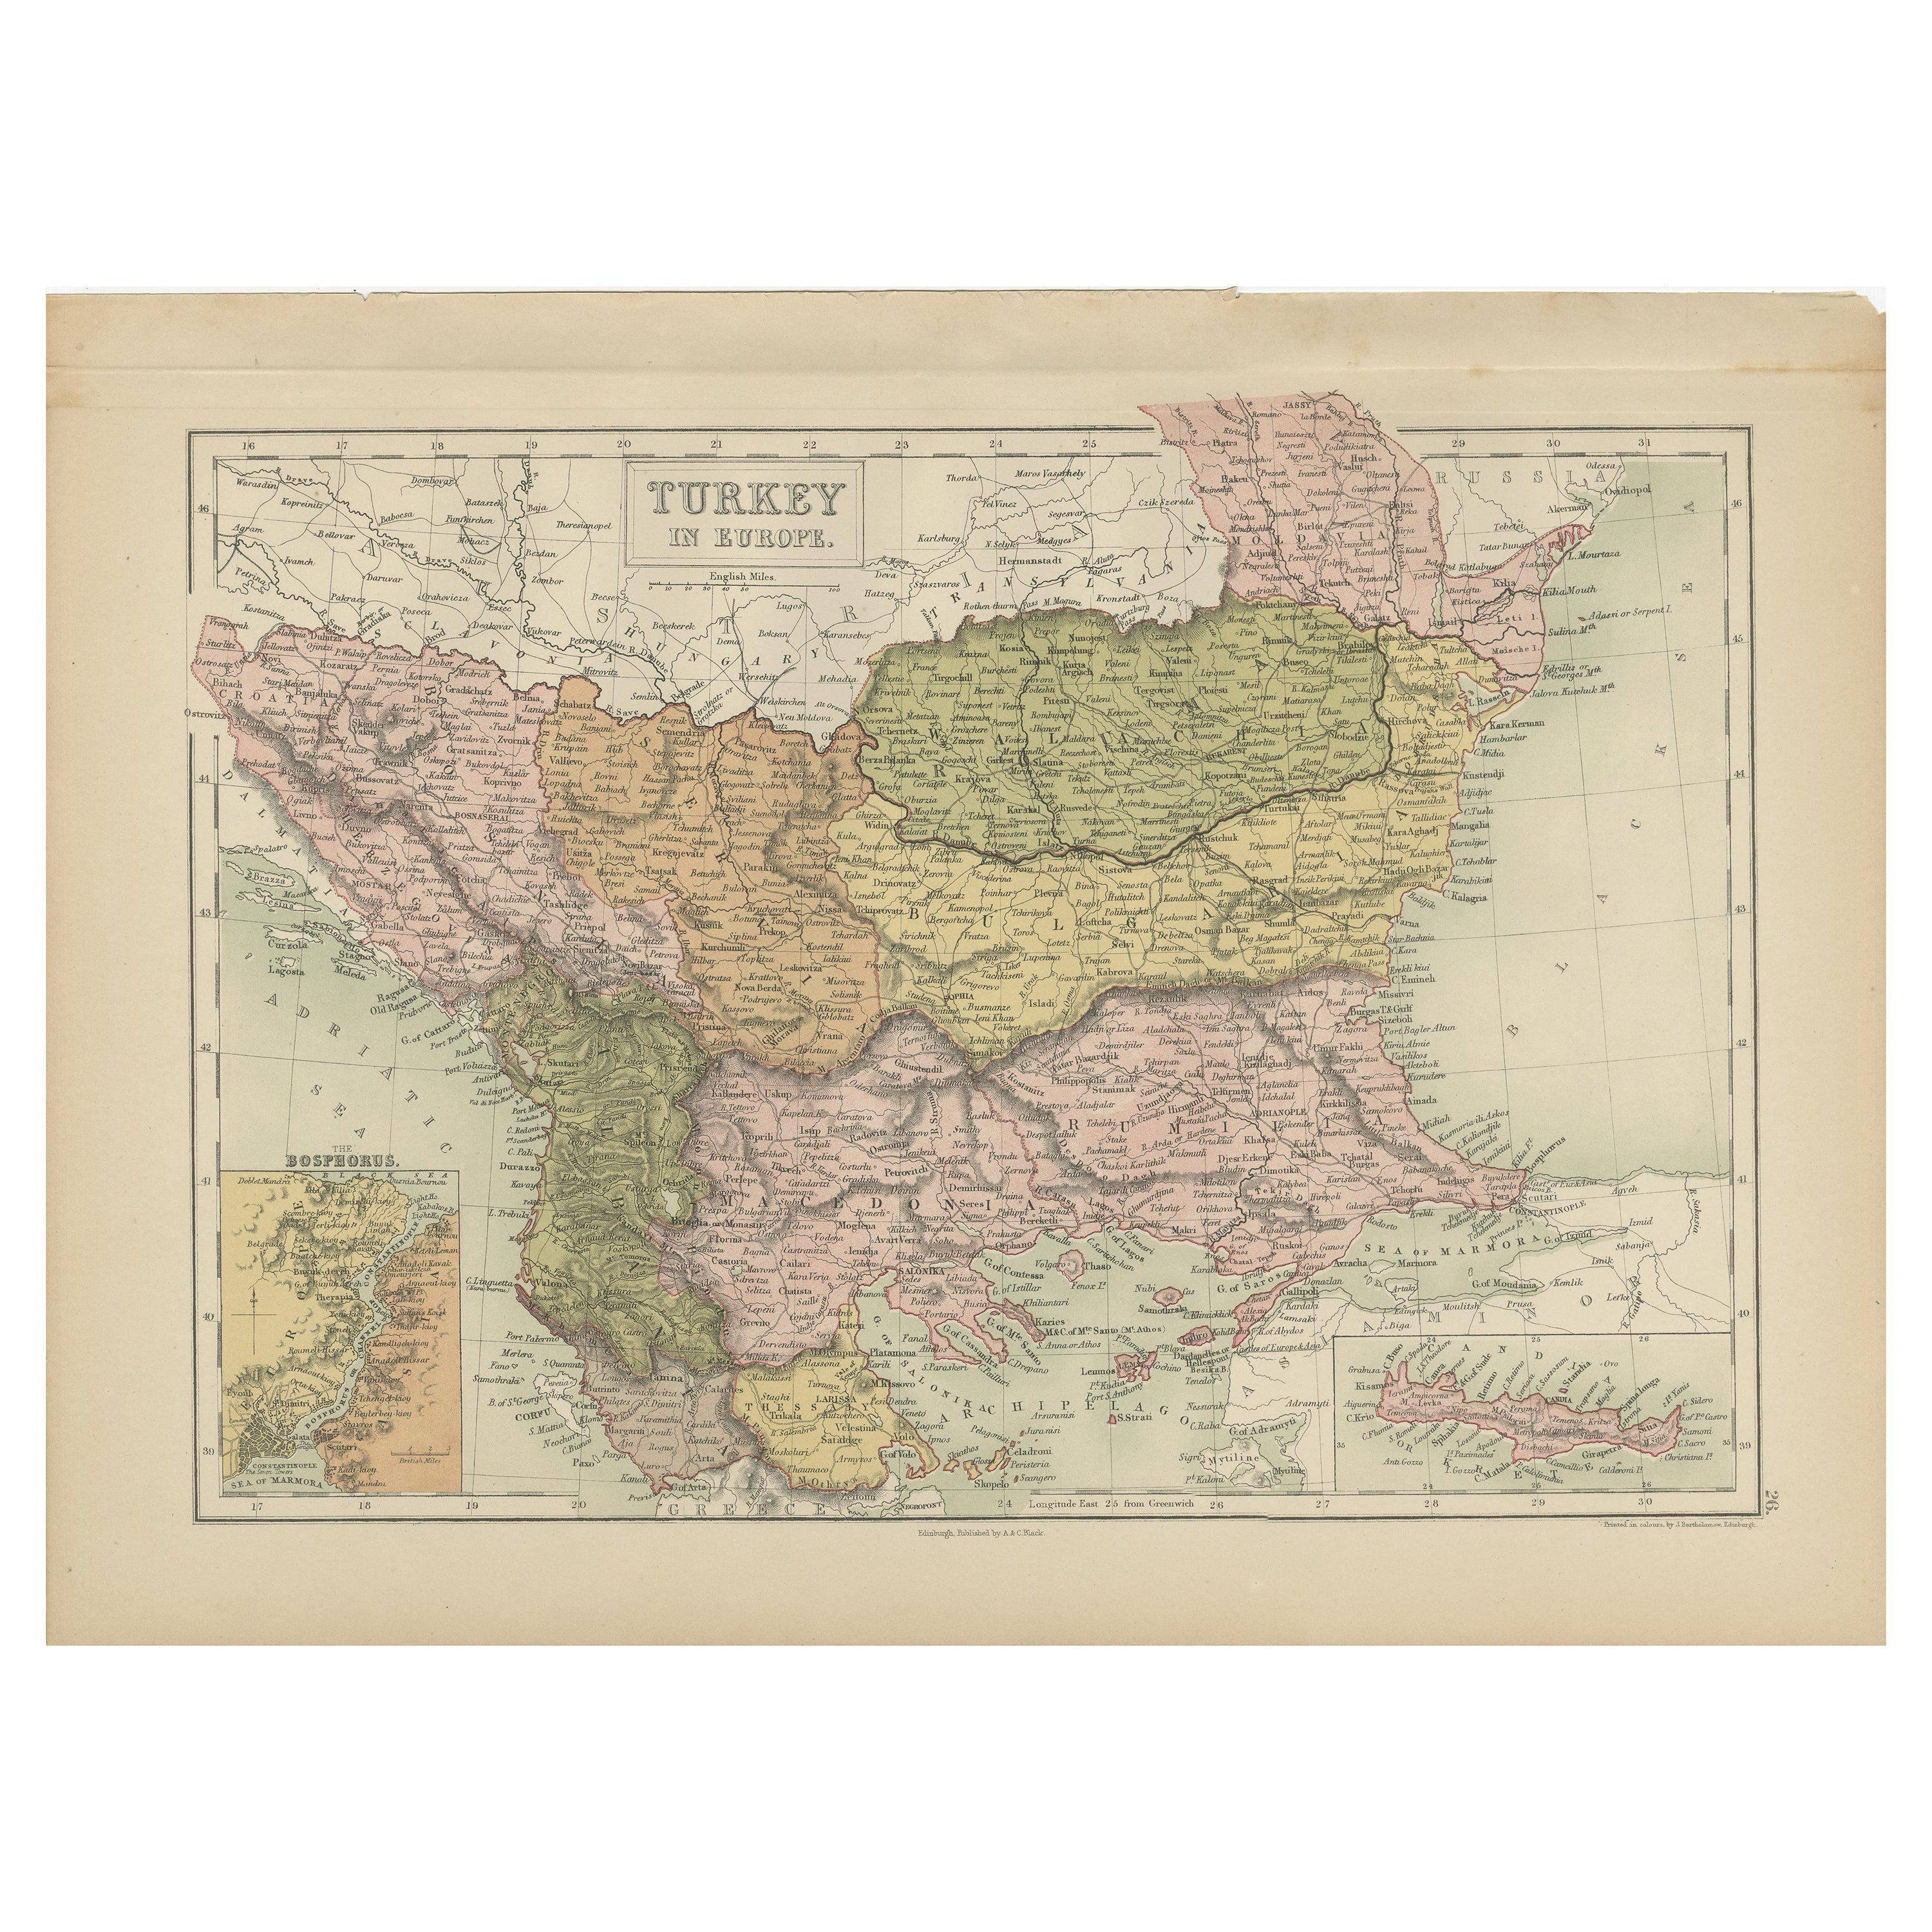 Antique Map of Turkey in Europe by A & C. Black, 1870